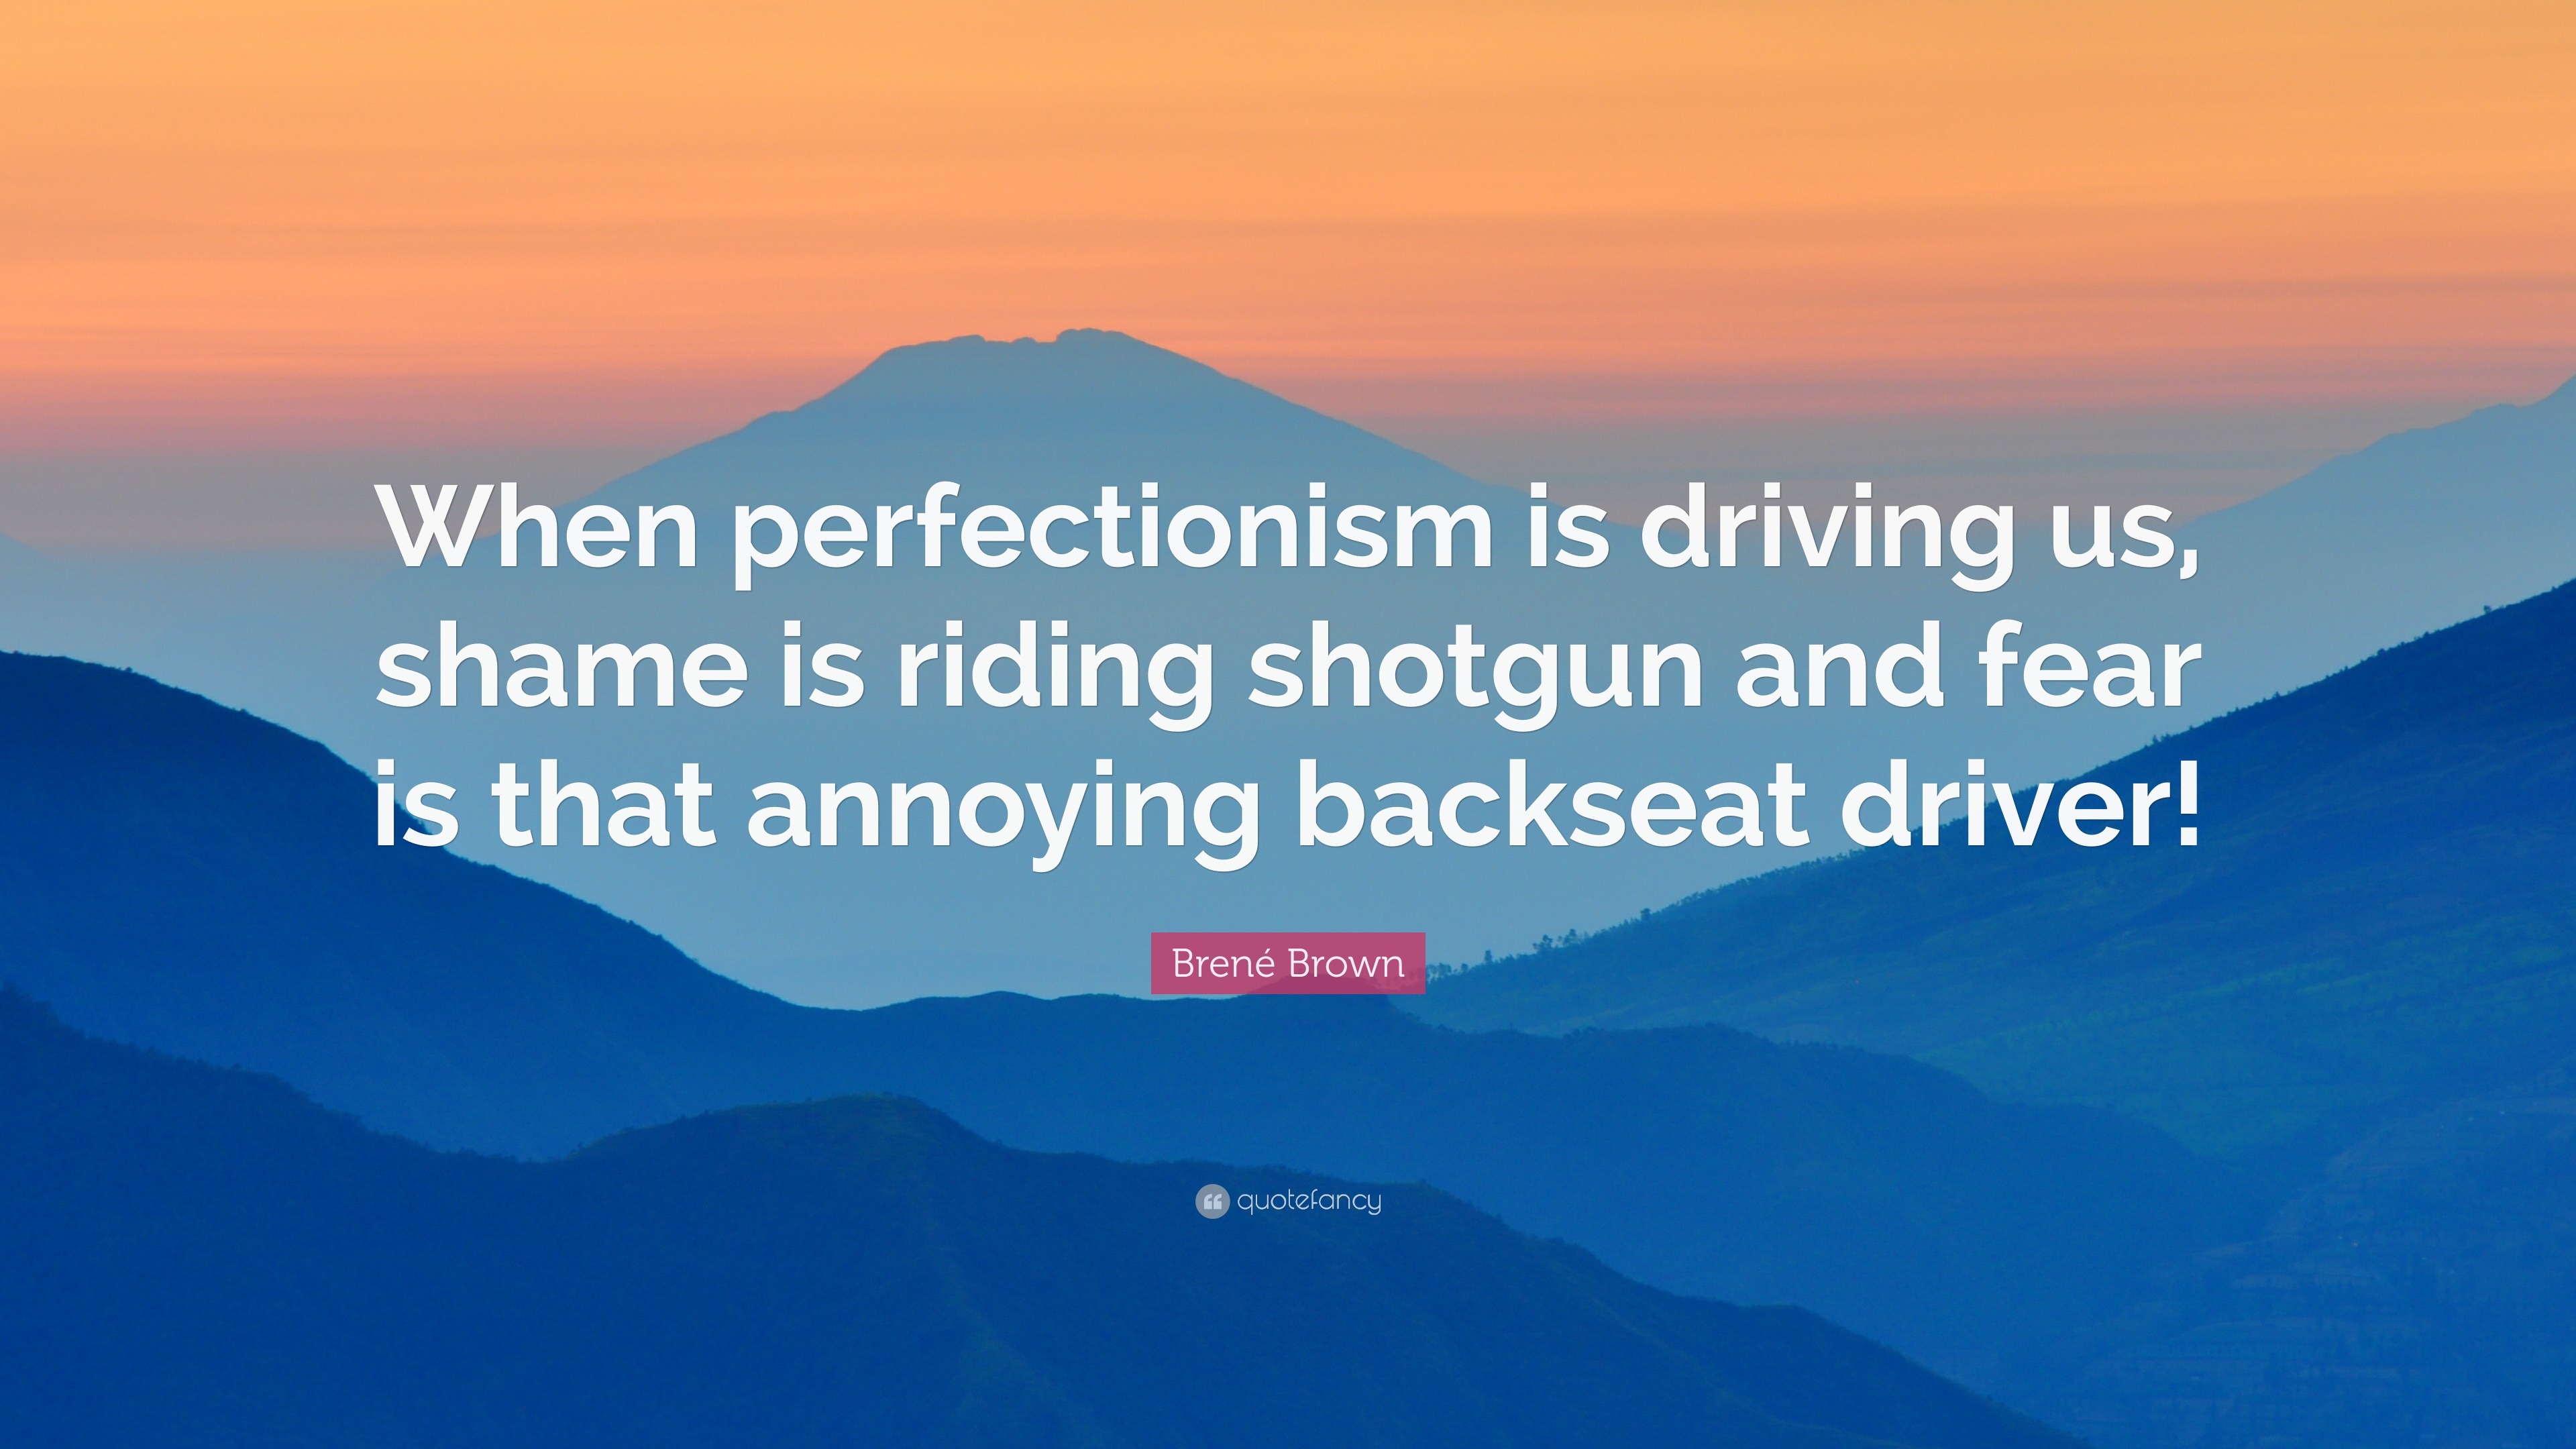 Brené Brown Quote: “When perfectionism is driving us, shame is riding